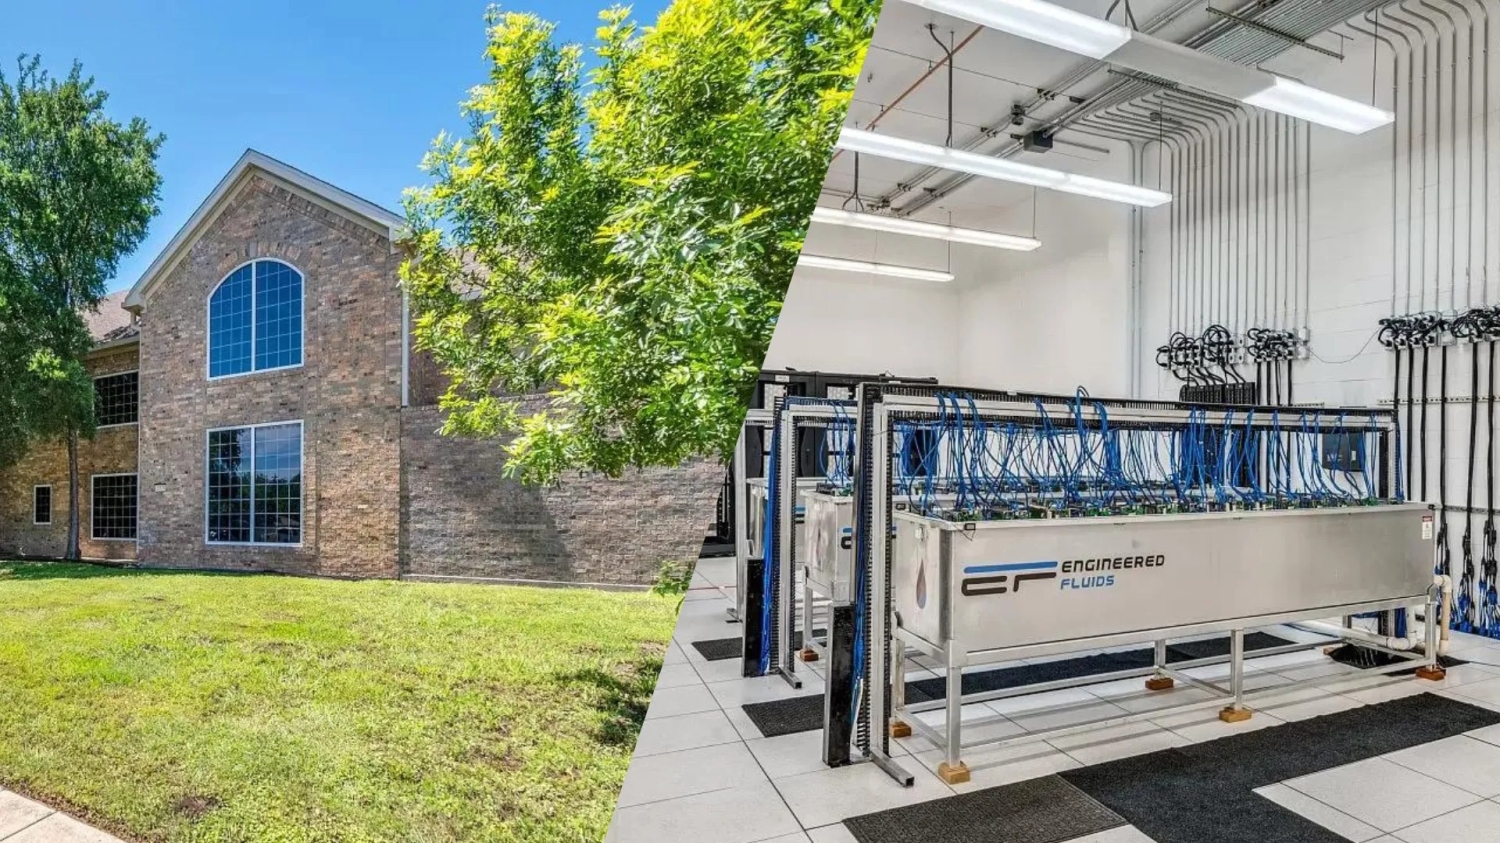 This $2.4M house in Texas has NO bedrooms, built-in data center with full liquid cooling system